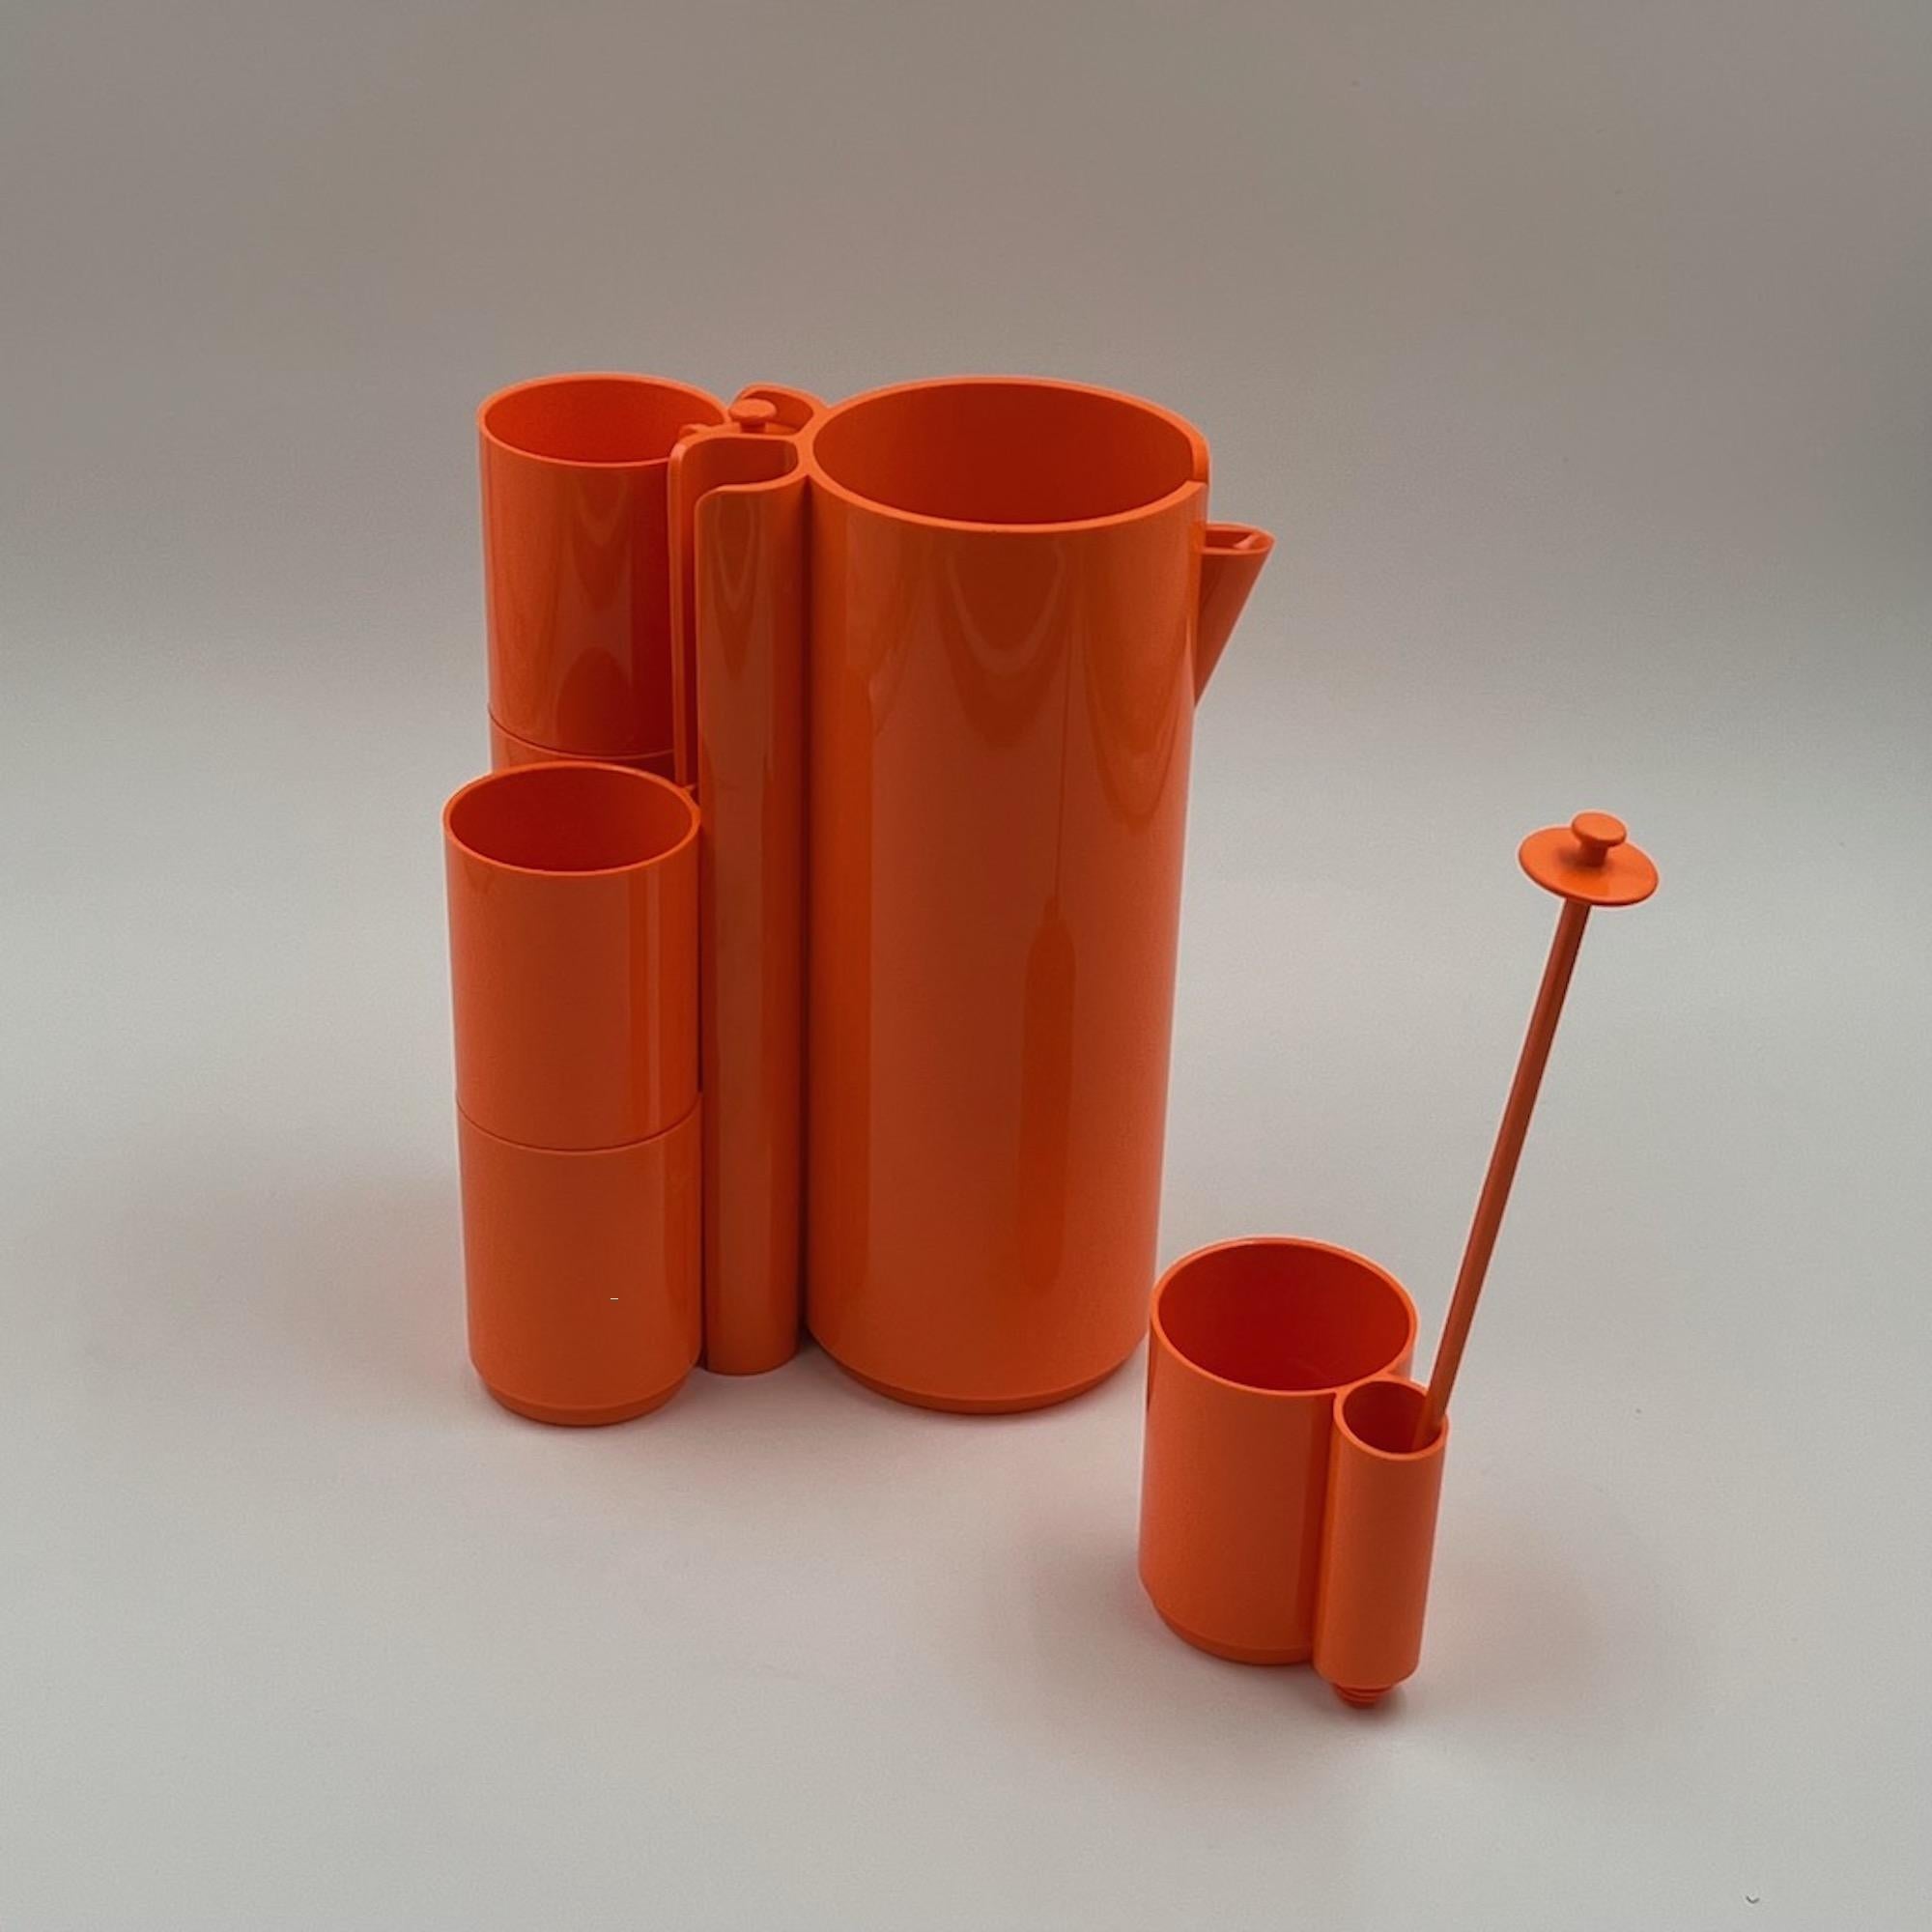 Vintage 'Orangeade' 1970s drinking set designed by Jean Pierre Vitrac in a vibrant orange color.  This beautiful set includes six plastic cups and a matching jug for all types of refreshing beverages.  This practical set is ingeniously designed with